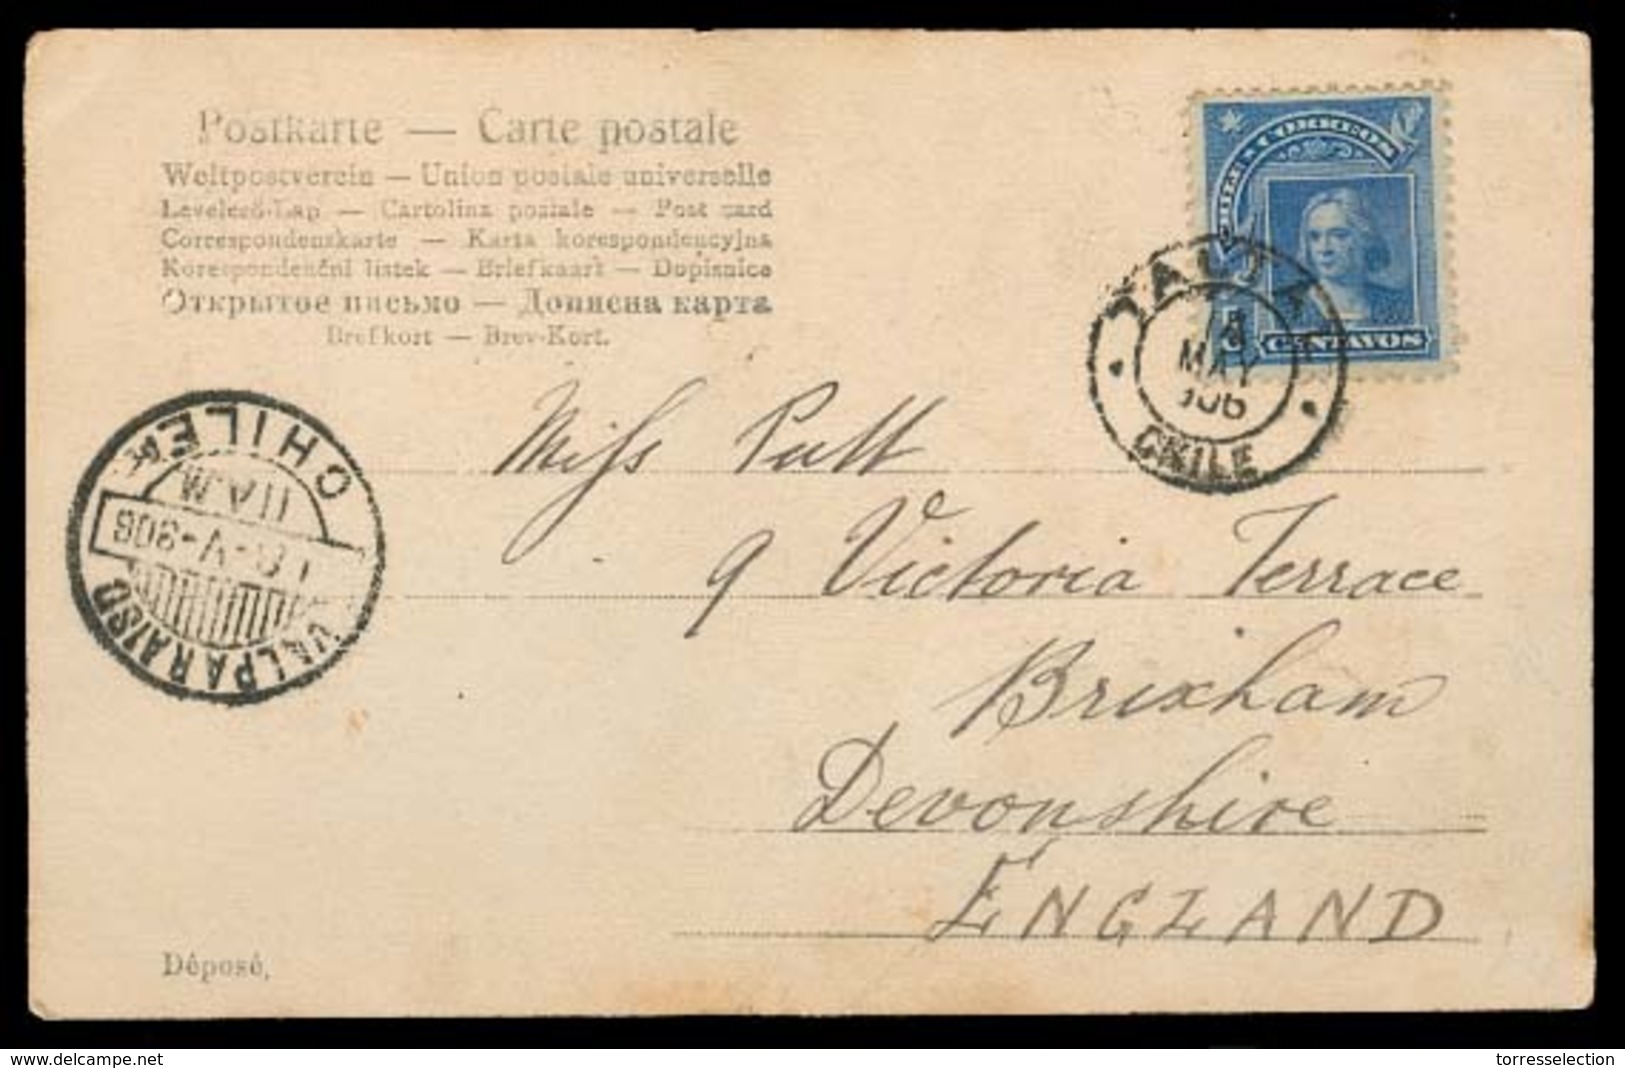 CHILE - Stationery. 1908. Taltal - UK. Fkd PPC. VF. - Chile